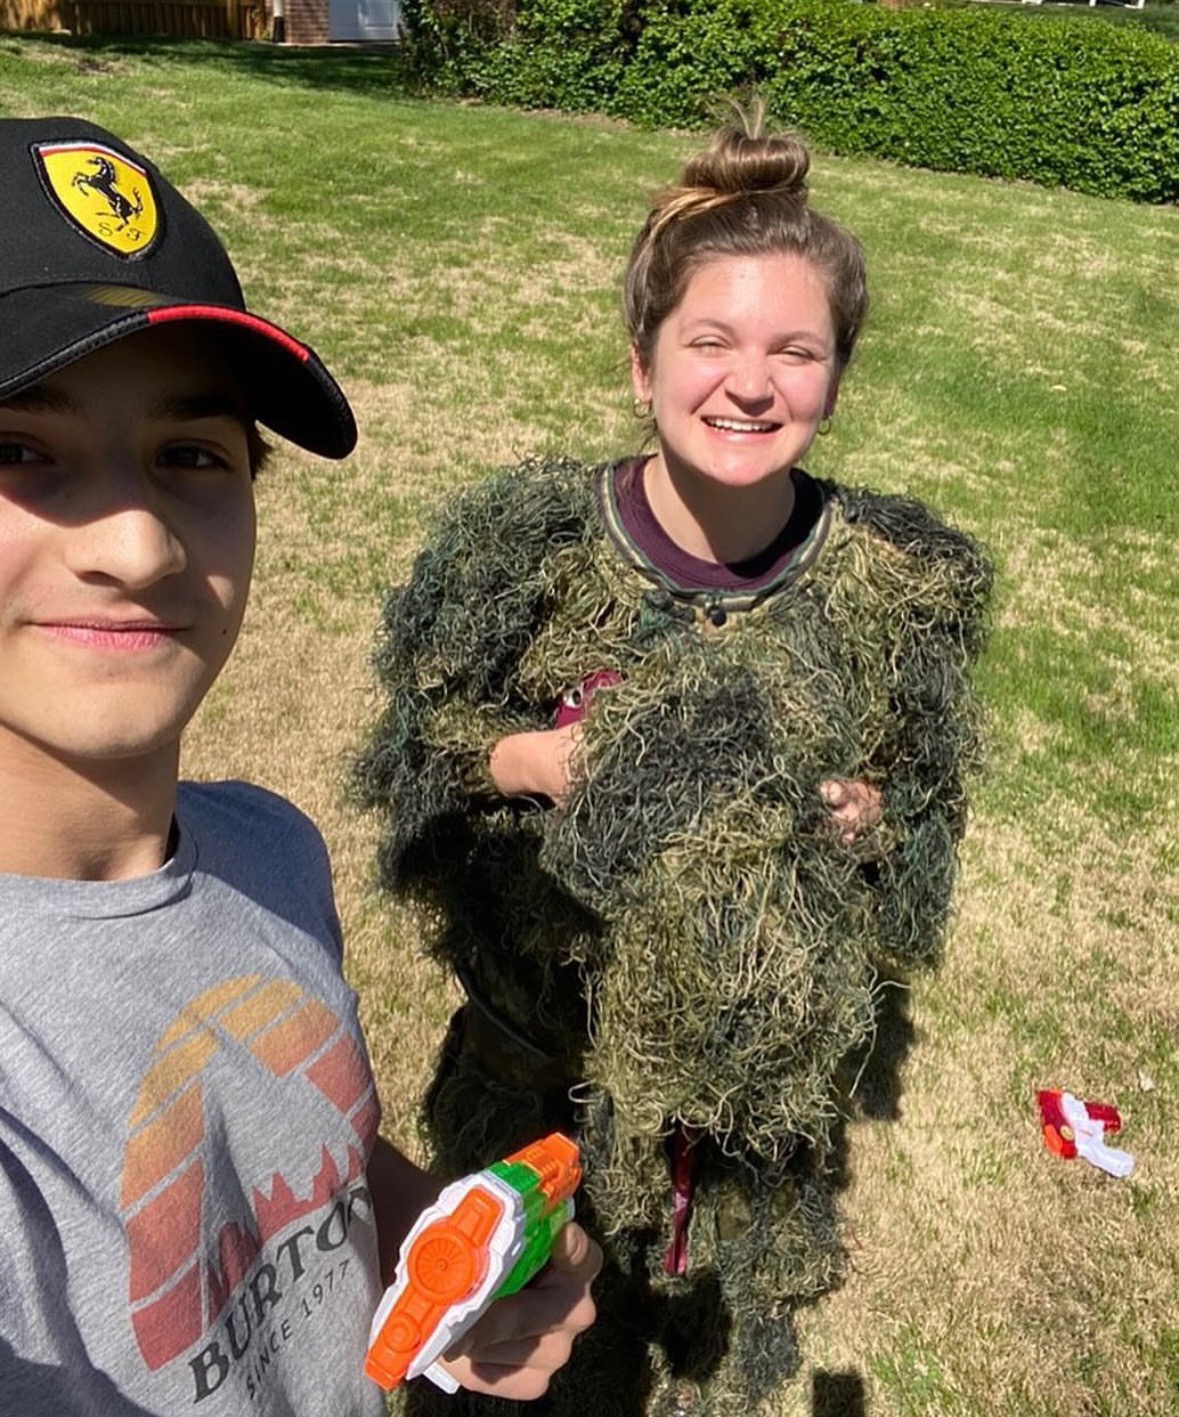 Senior Camden Lannin camps outside Alessandro Farruggios house in a ghillie suit just to get shot by him in defense.